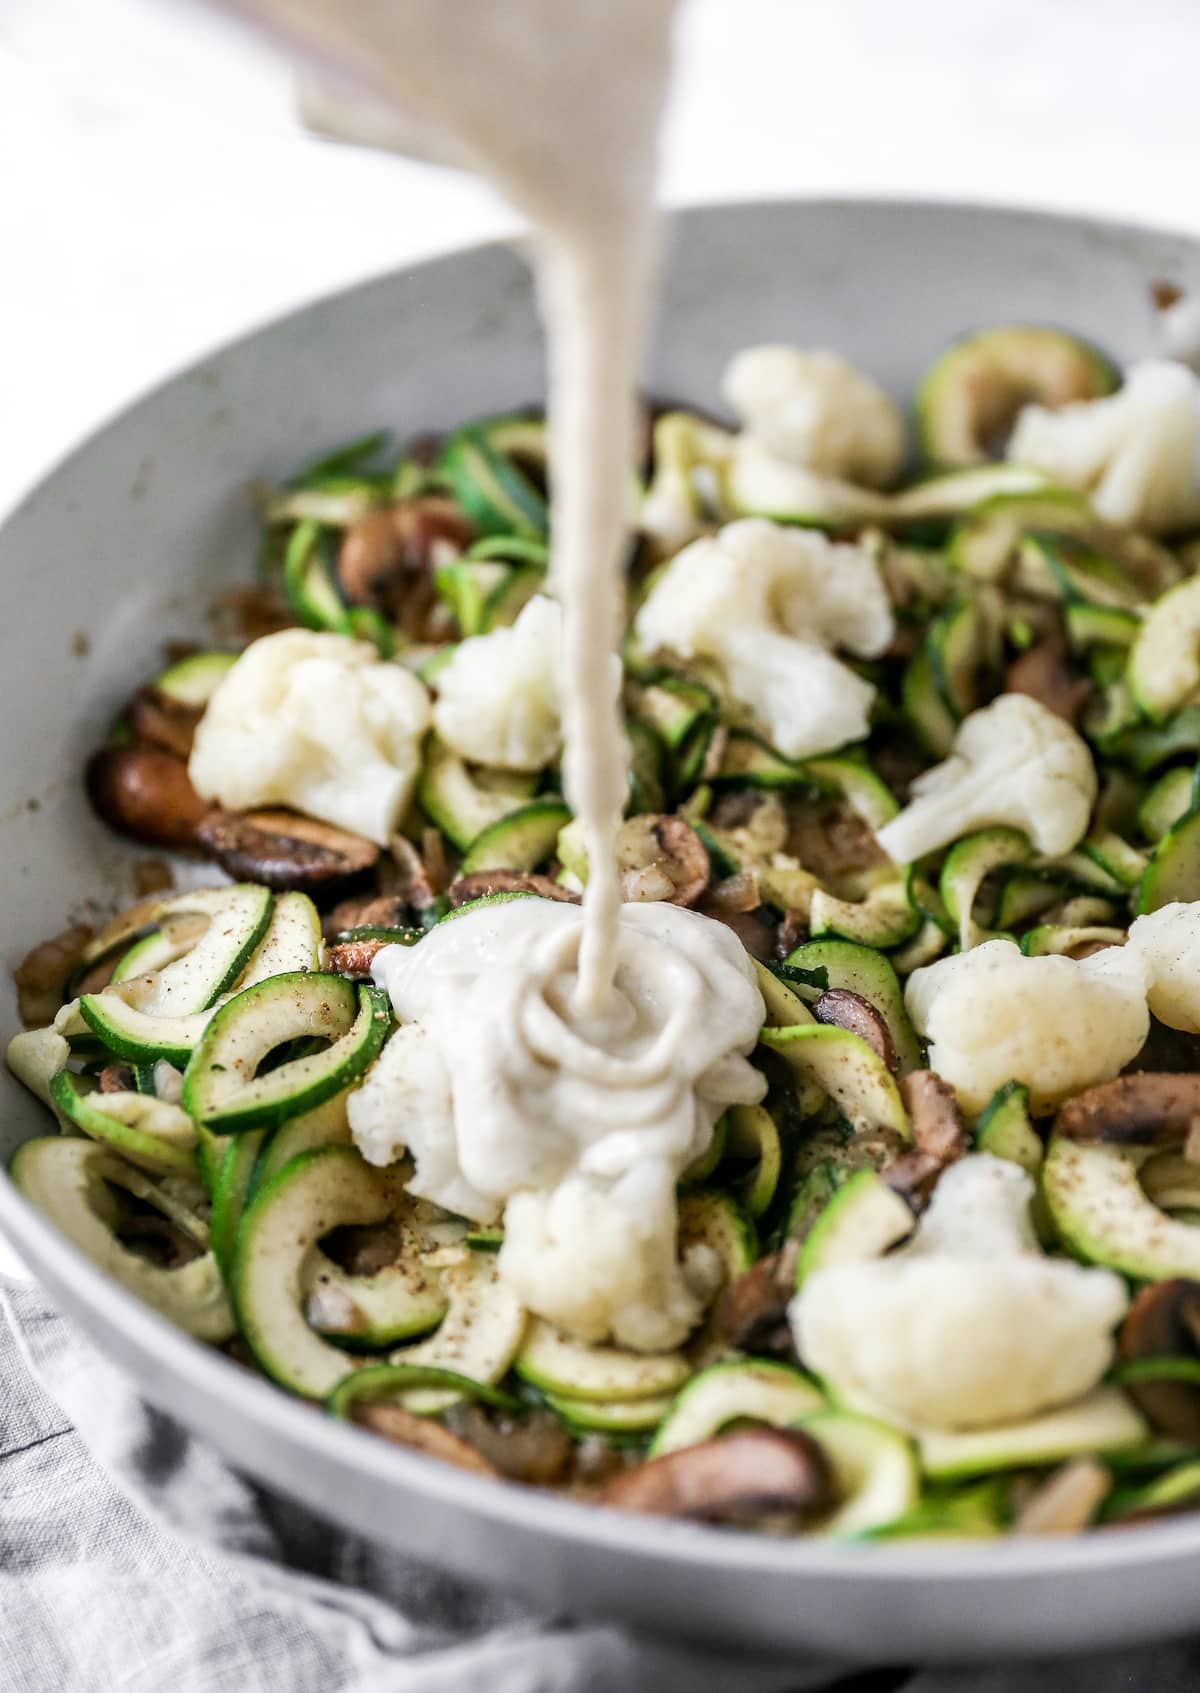 Cauliflower alfredo sauce drizzling over zucchini noodles and mushrooms.